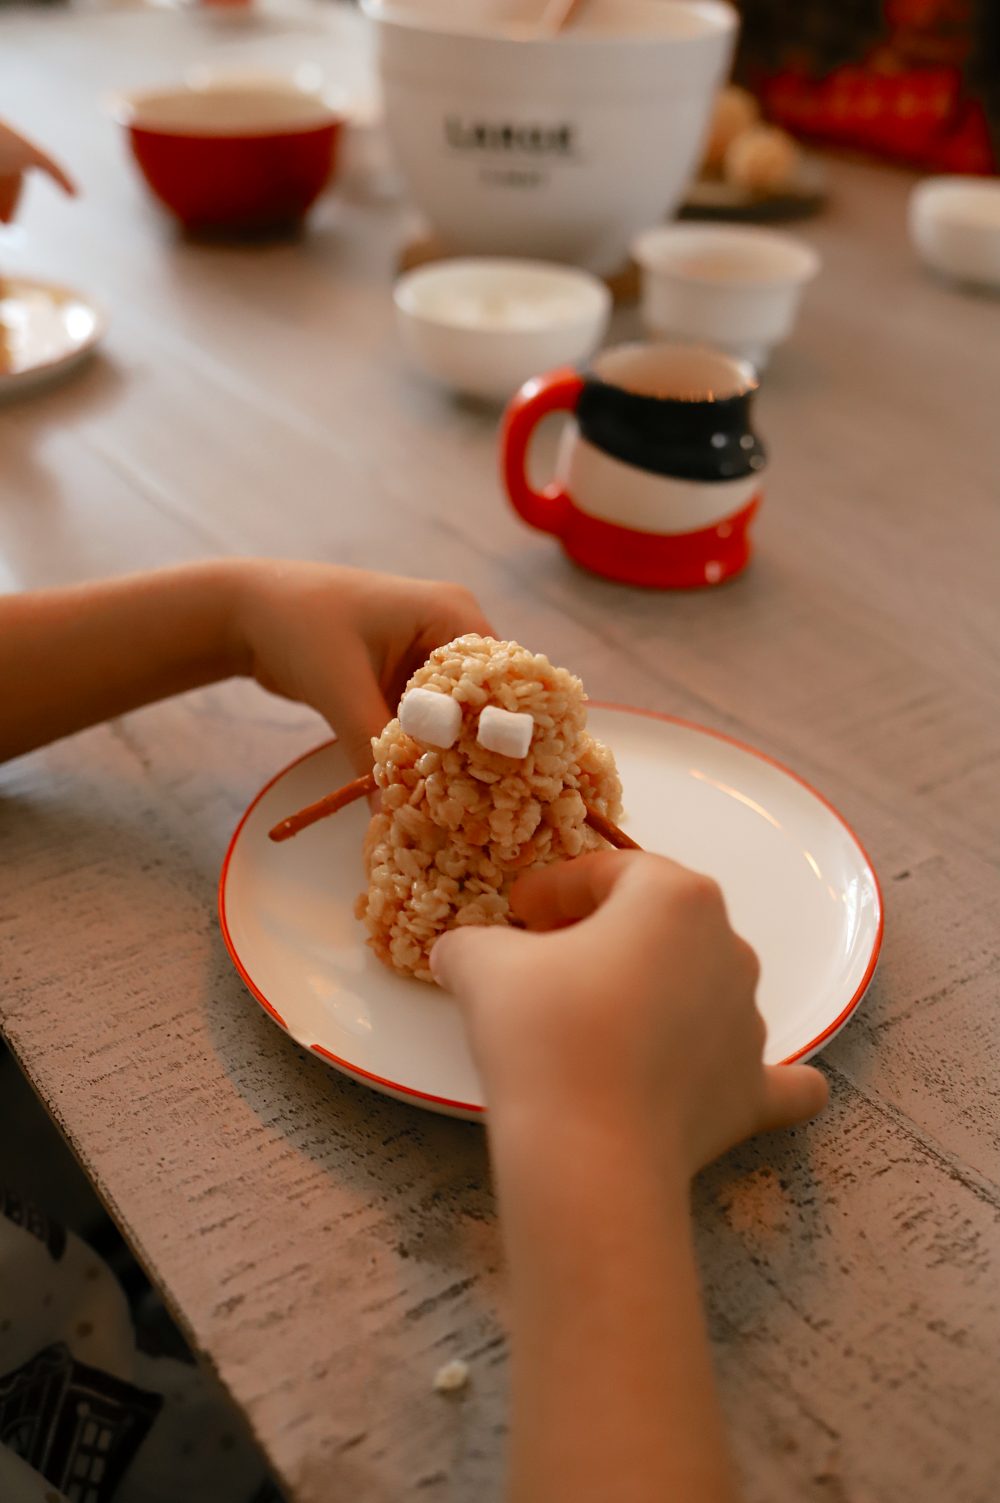 How to Make a Festive Rice Krispies Snowman Christmas Activity from mom and lifestyle blogger Tabitha Blue of Fresh Mommy Blog